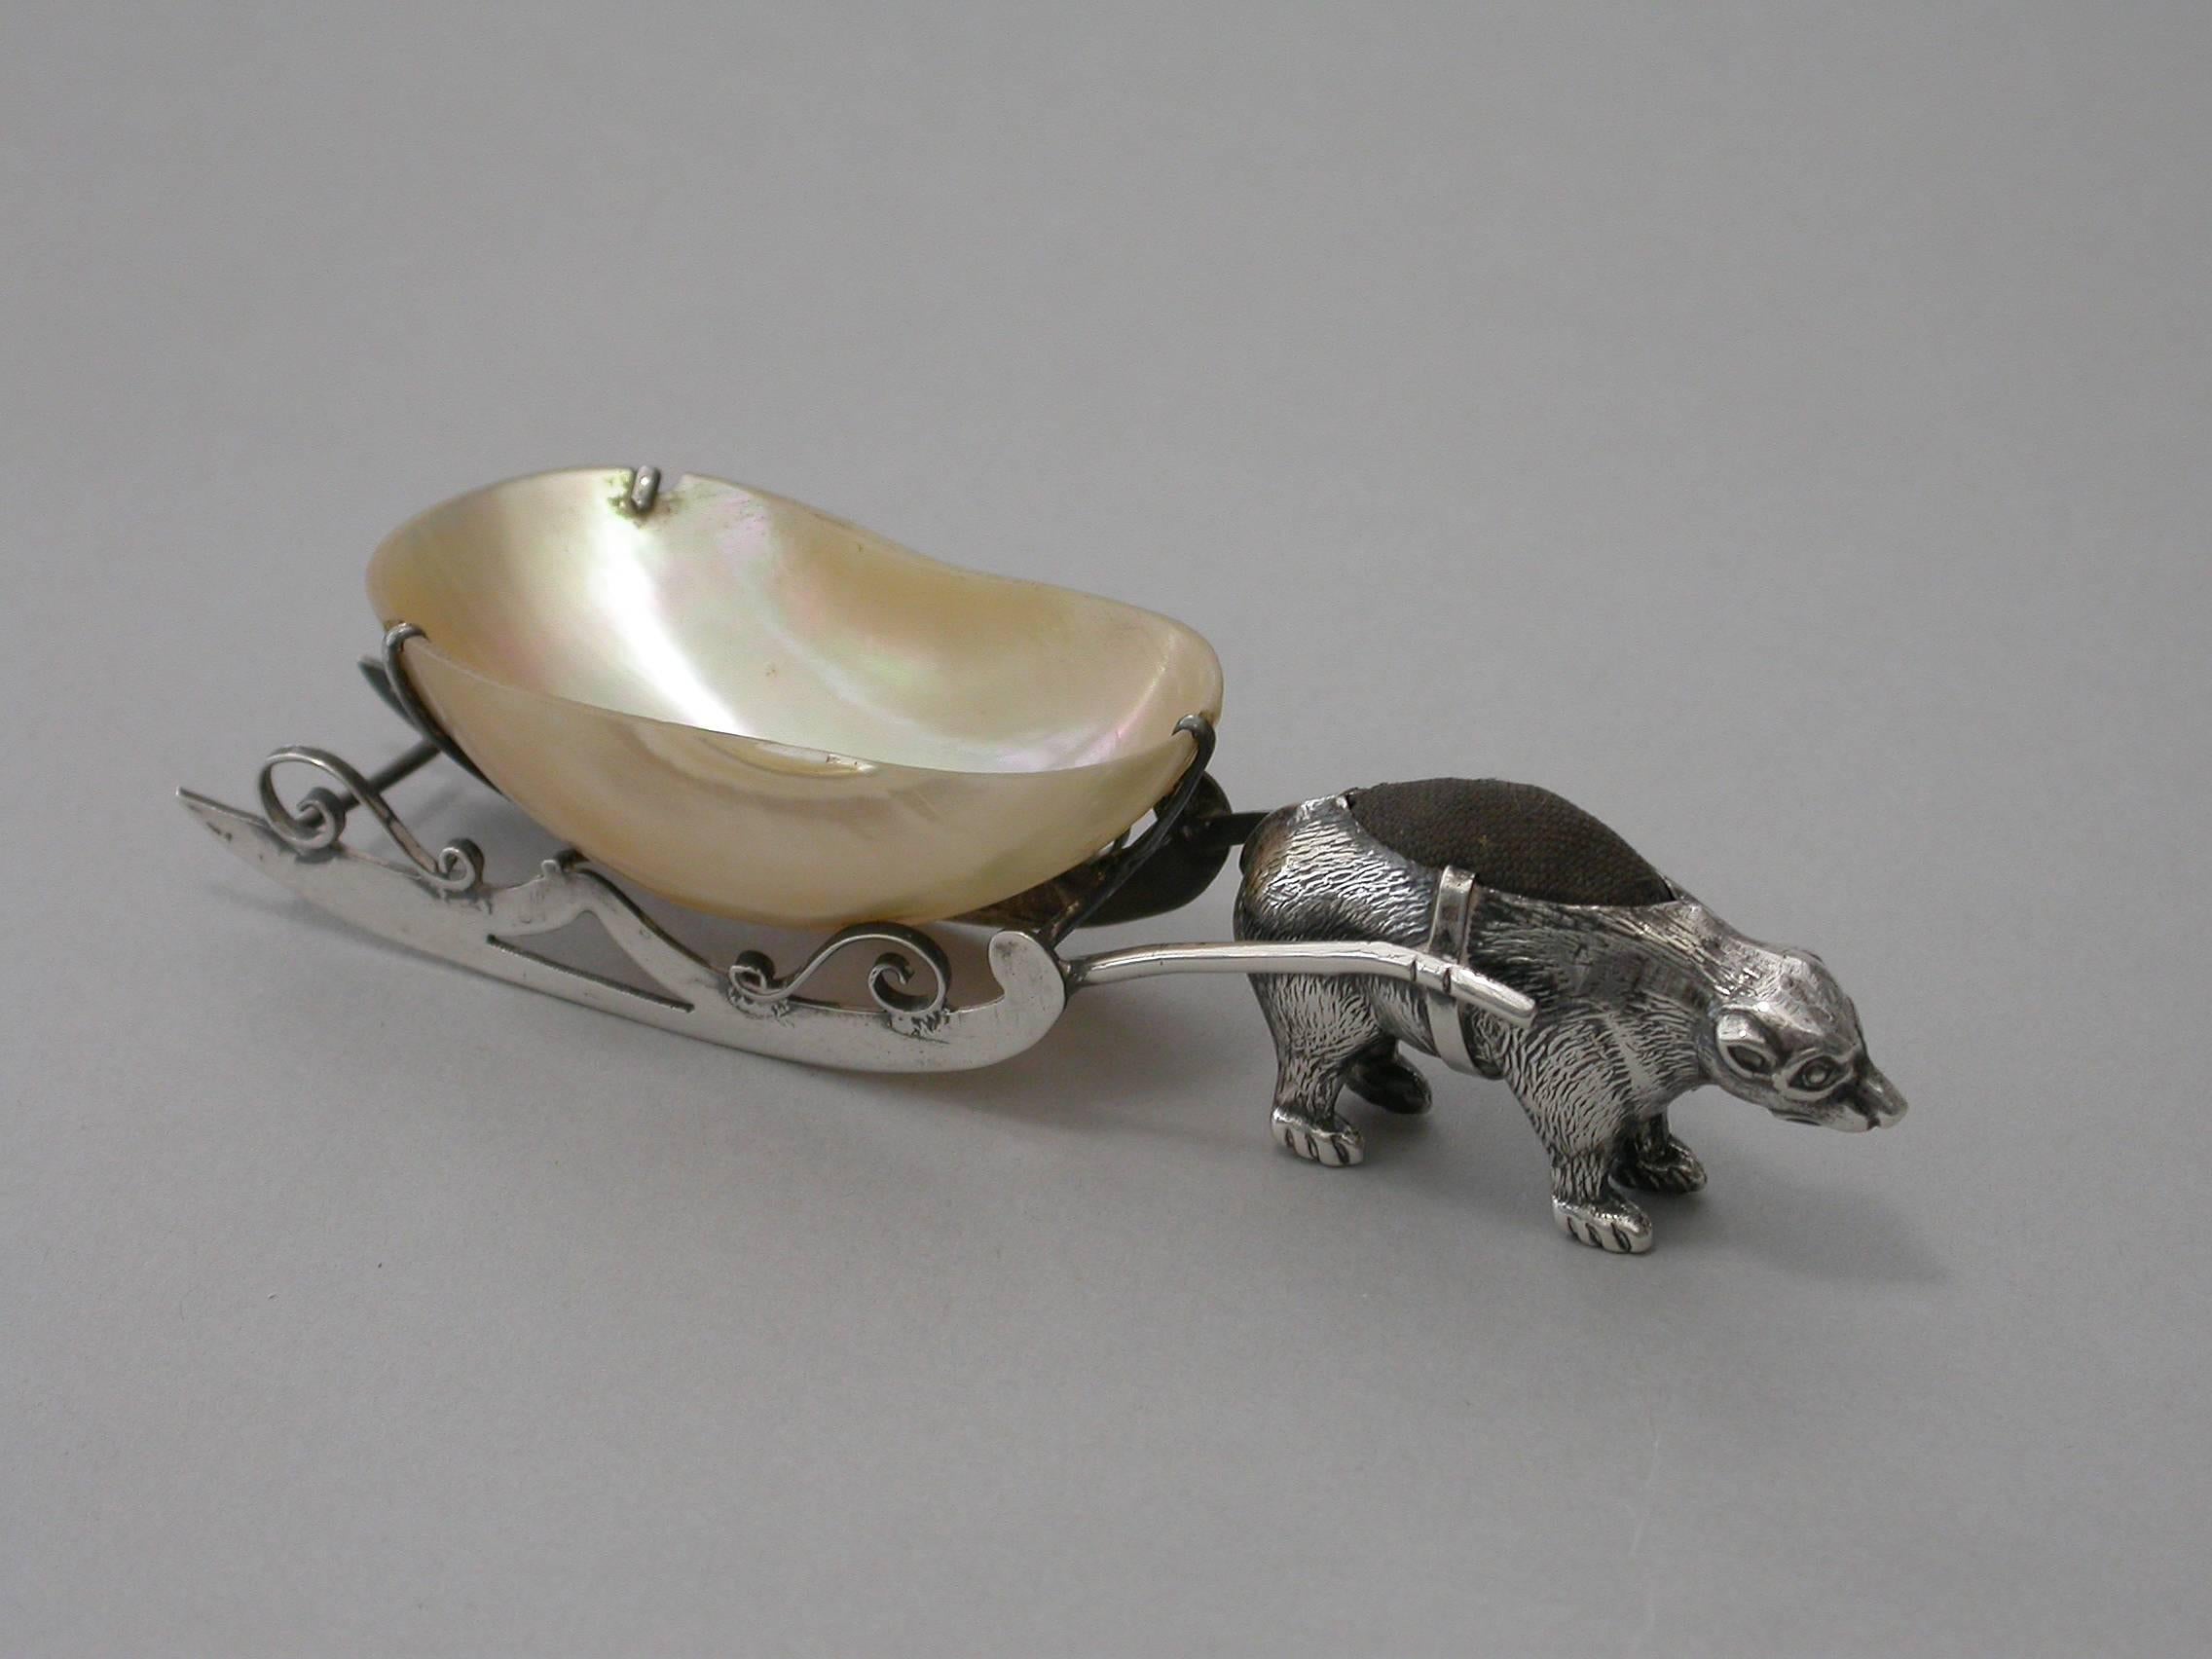 An extremely rare Edwardian silver pin cushion depicting a polar bear pulling a silver mounted mother-of-pearl pin tray made in the form of a sleigh.

By Robert Pringle & Sons, Birmingham, 1909

In good condition with no damage or